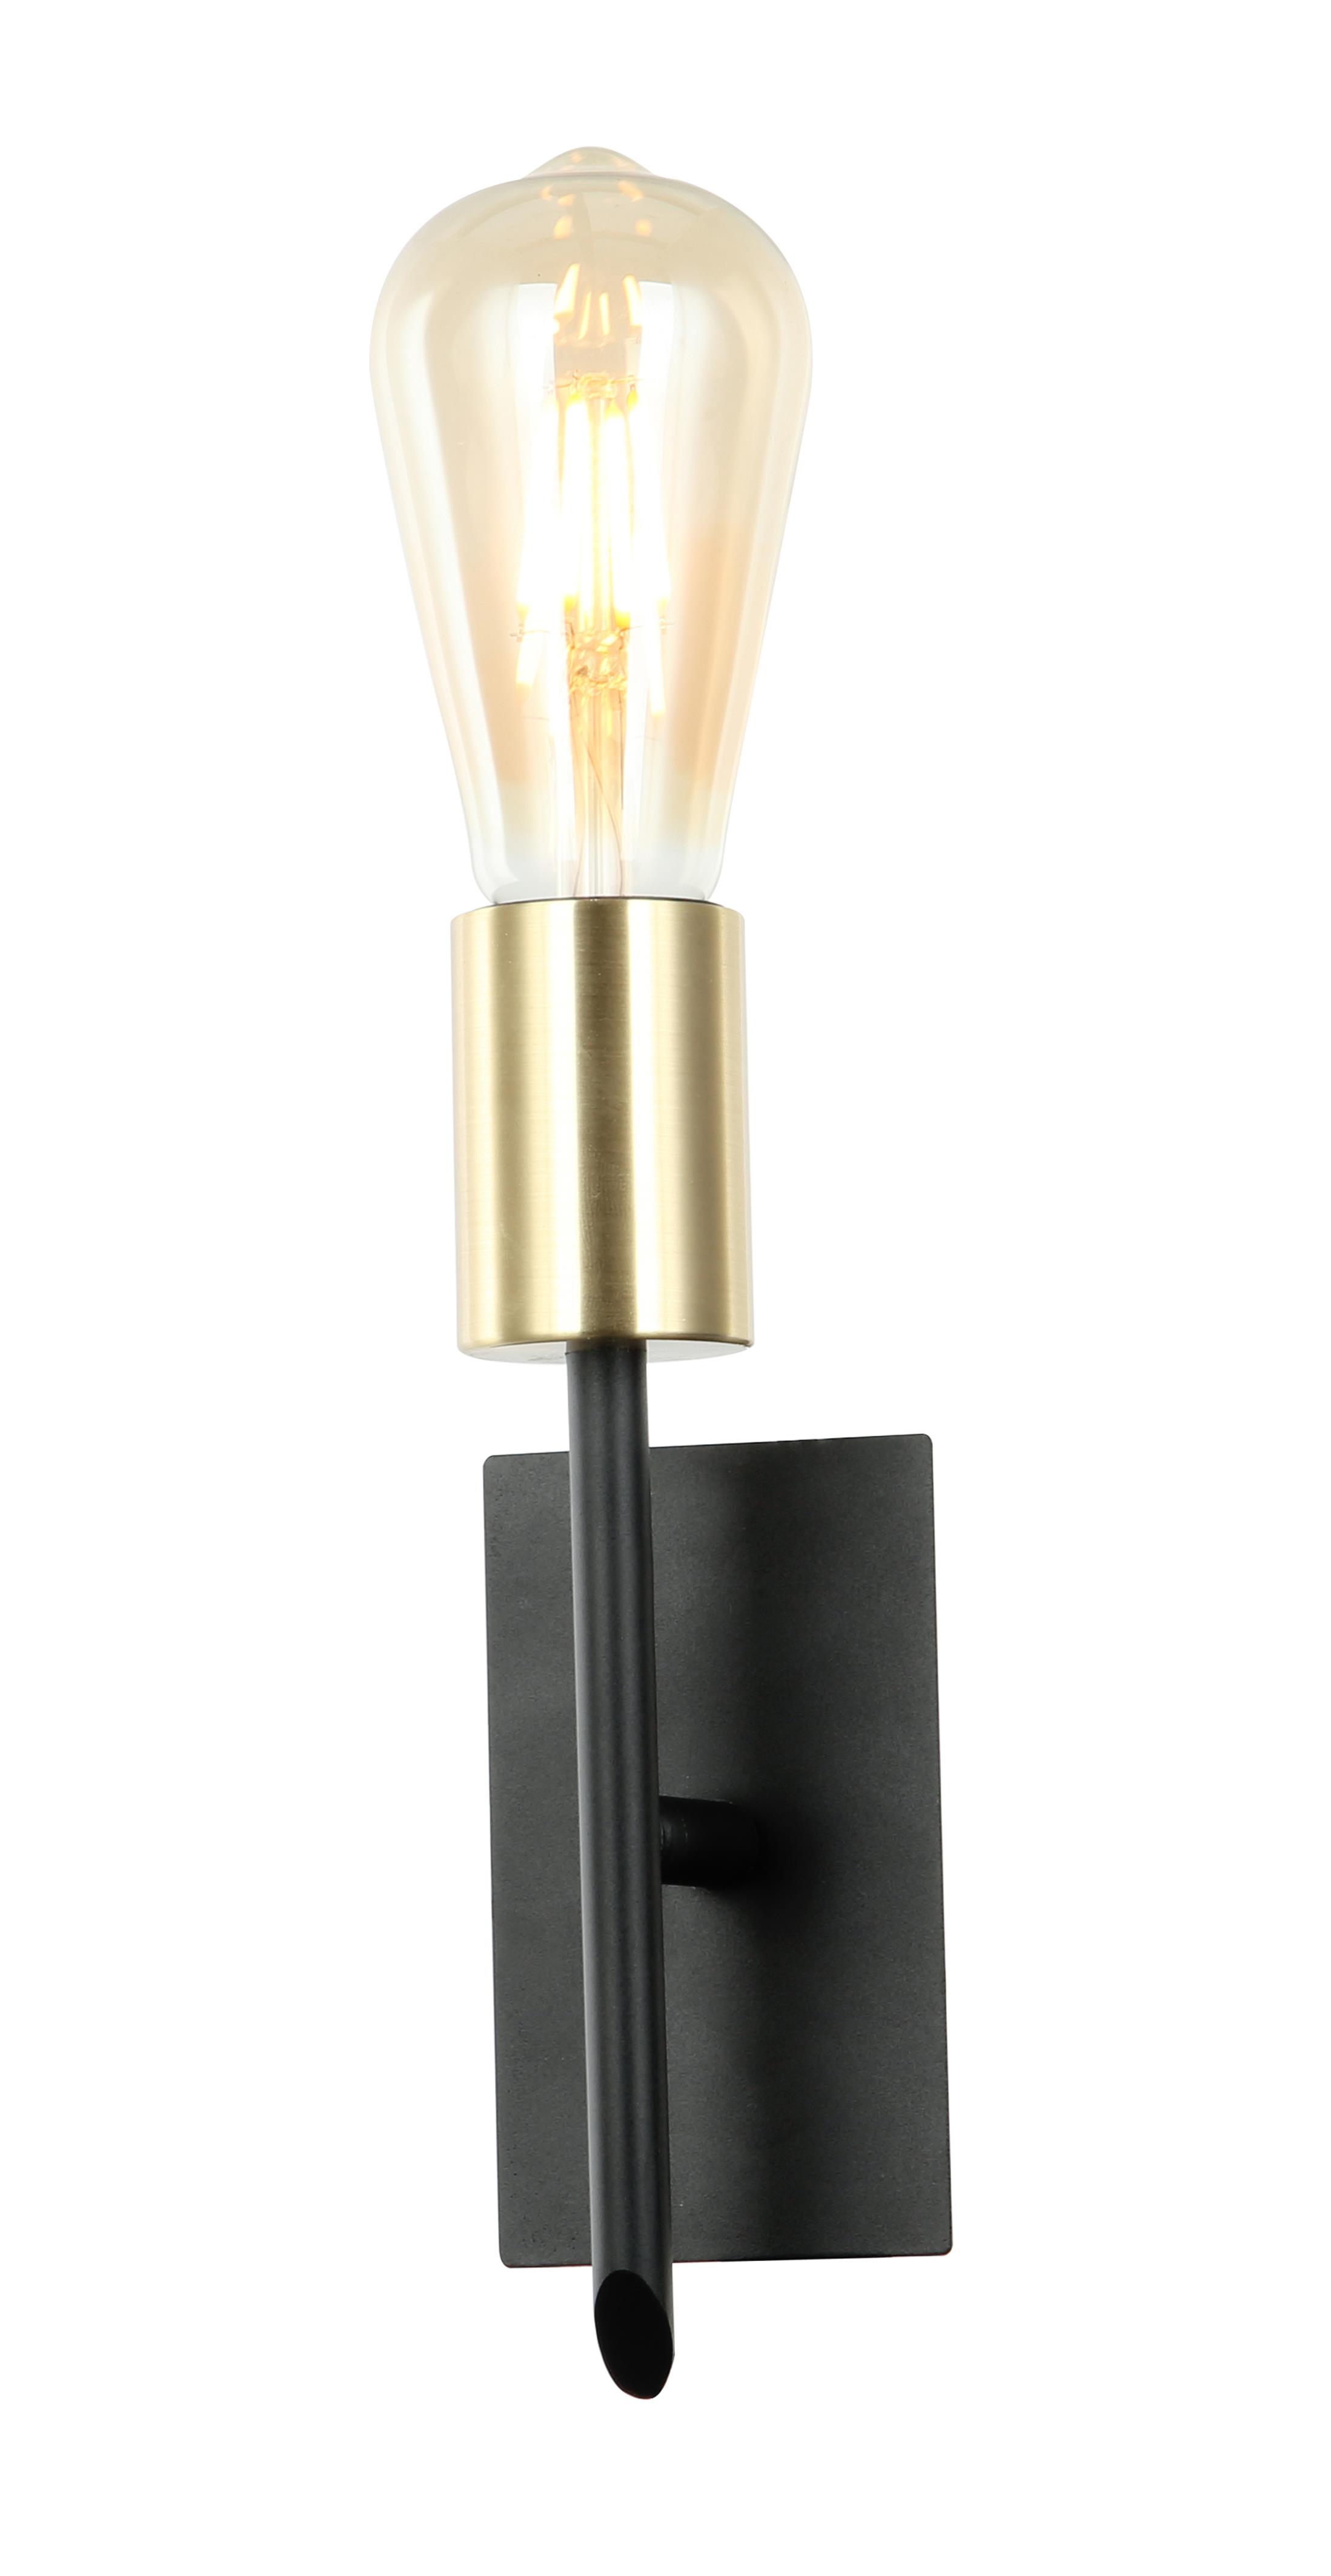 Saintly sconces modern wall sconces manufacturer for study room-1